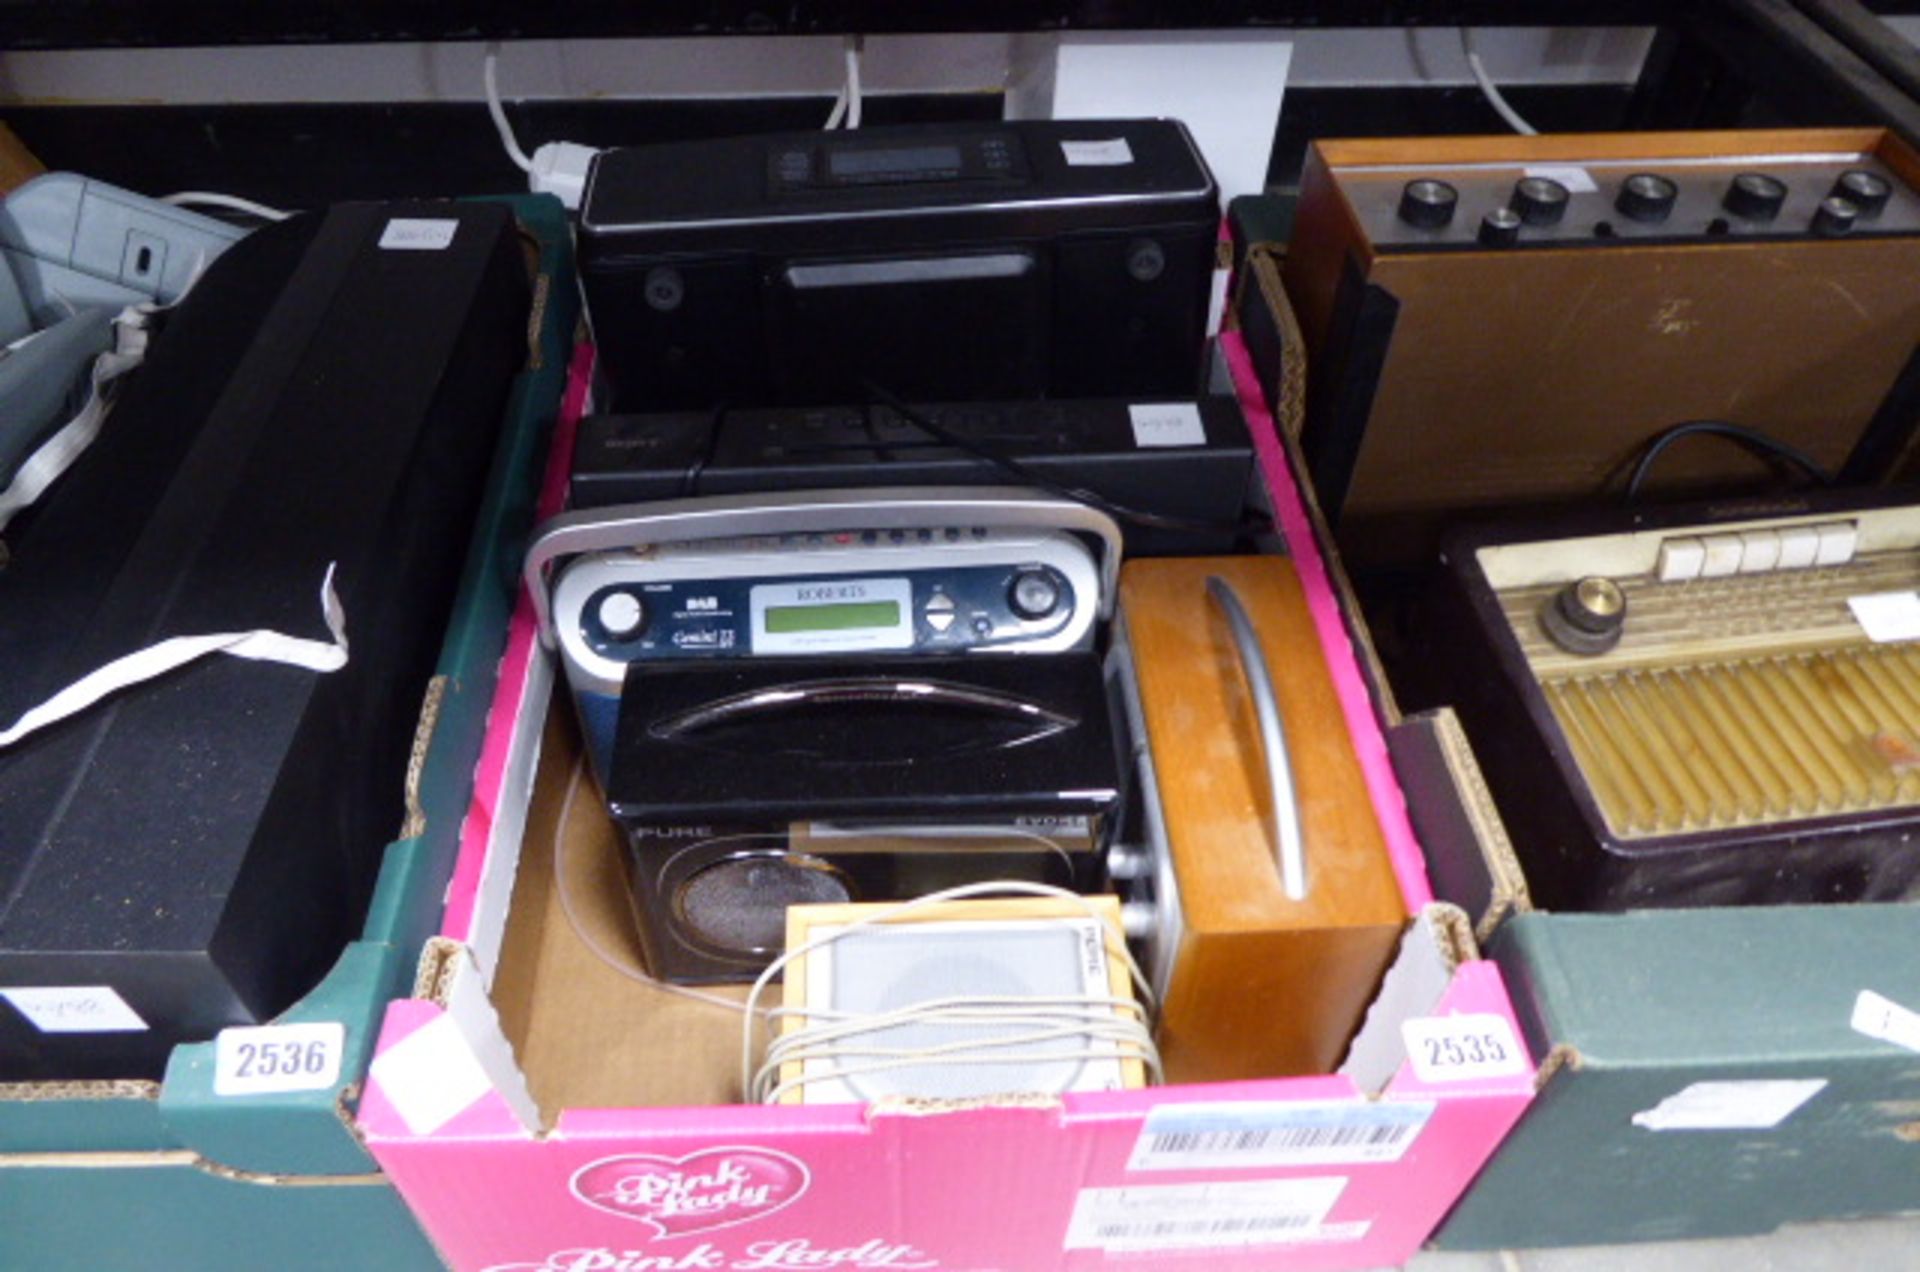 Tray containing selection of DAB and other radios